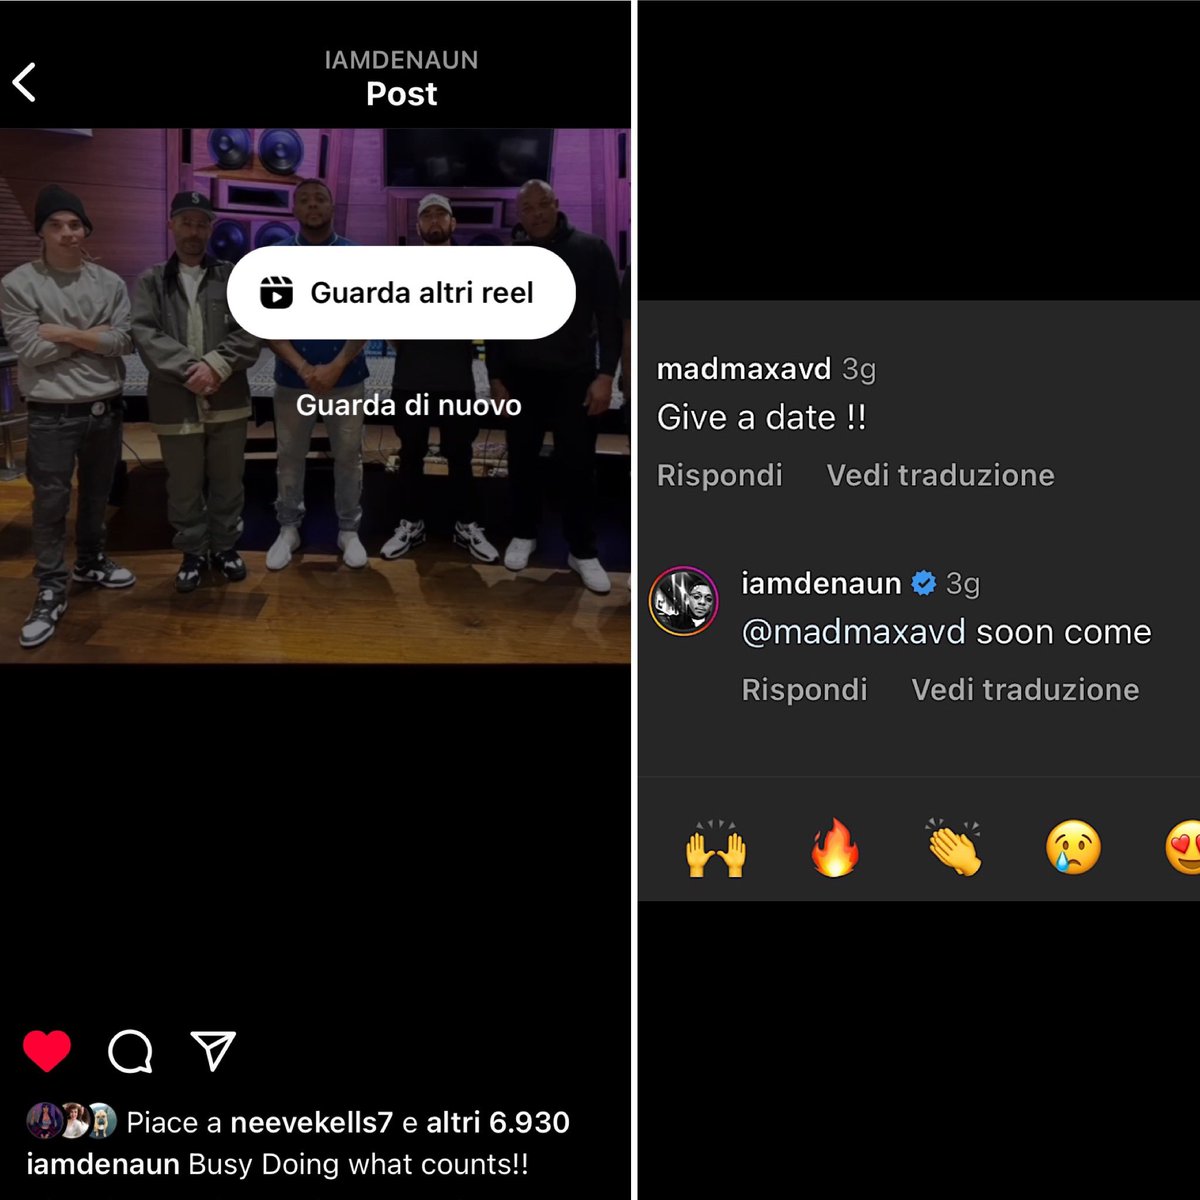 Judging by Denaun's response, it shouldn't be long before an announcement about a possible date, if not directly the surprise drop of Eminem's next album.

#music #song #hiphop #love #rap #favoritesong #bestsong #bumpin #repeat #listentothis #goodmusic